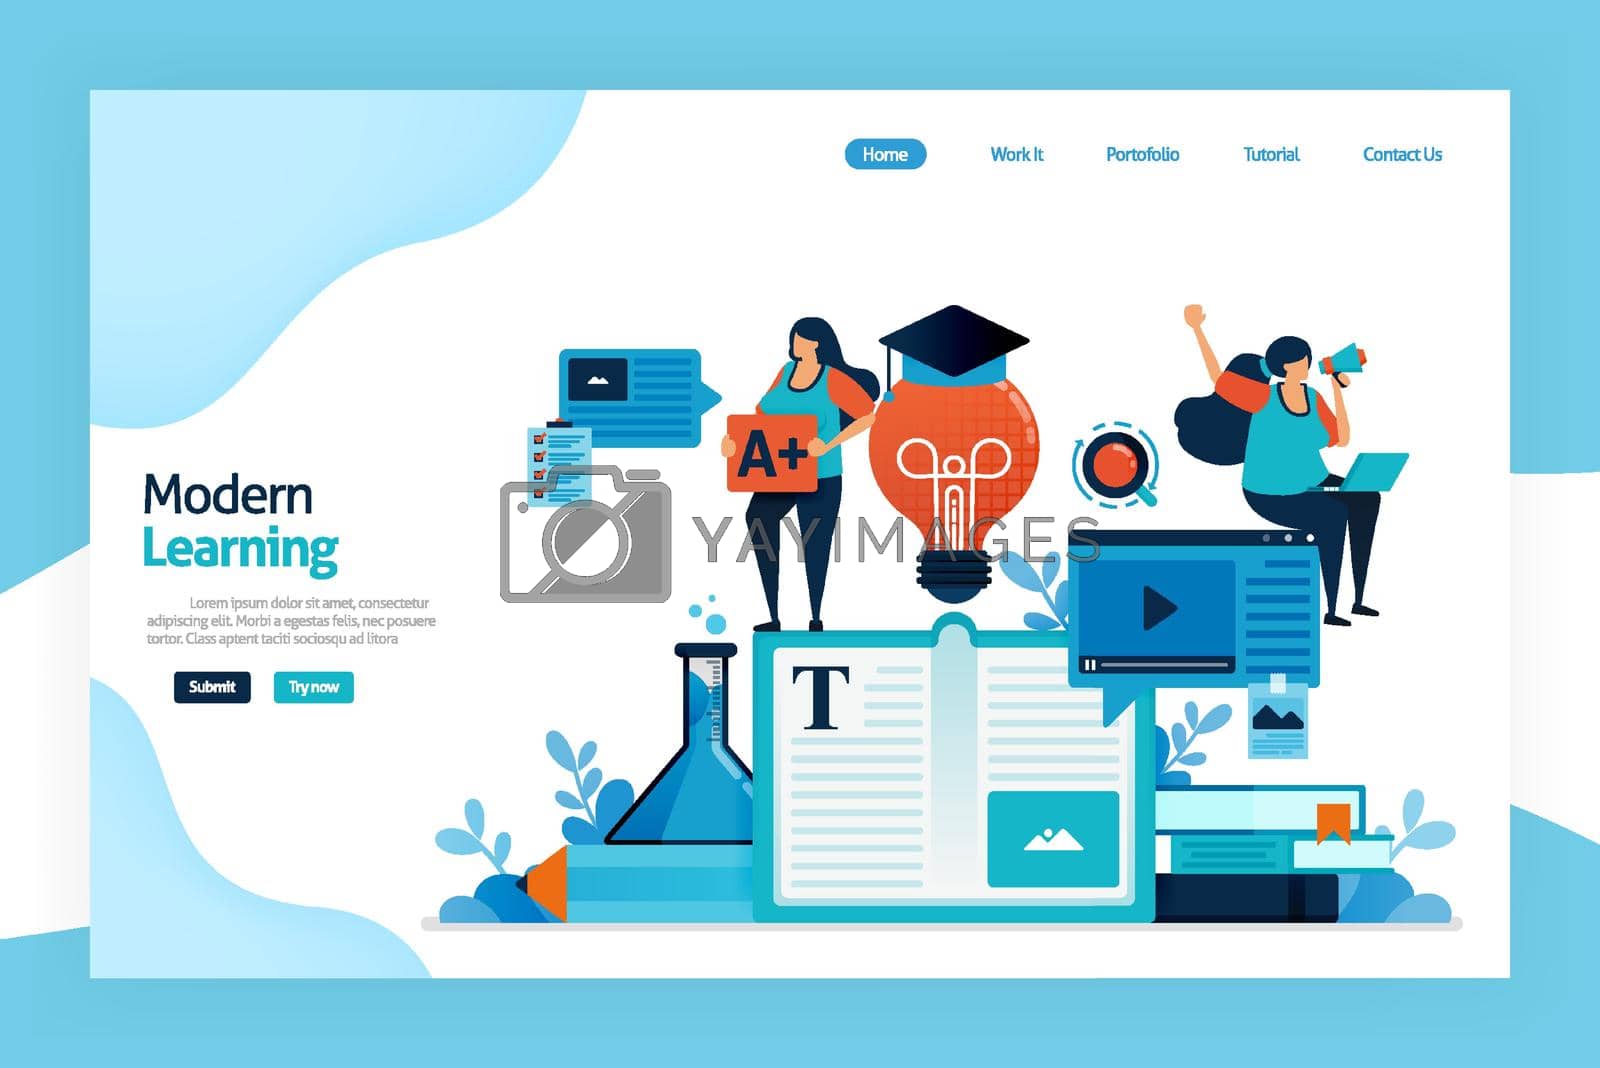 Royalty free image of Landing page of modern learning. Educational process to acquiring idea, modifying knowledge, behaviors, skills, values, literacy, preferences with technology. designed for website, mobile apps, poster by yayimage